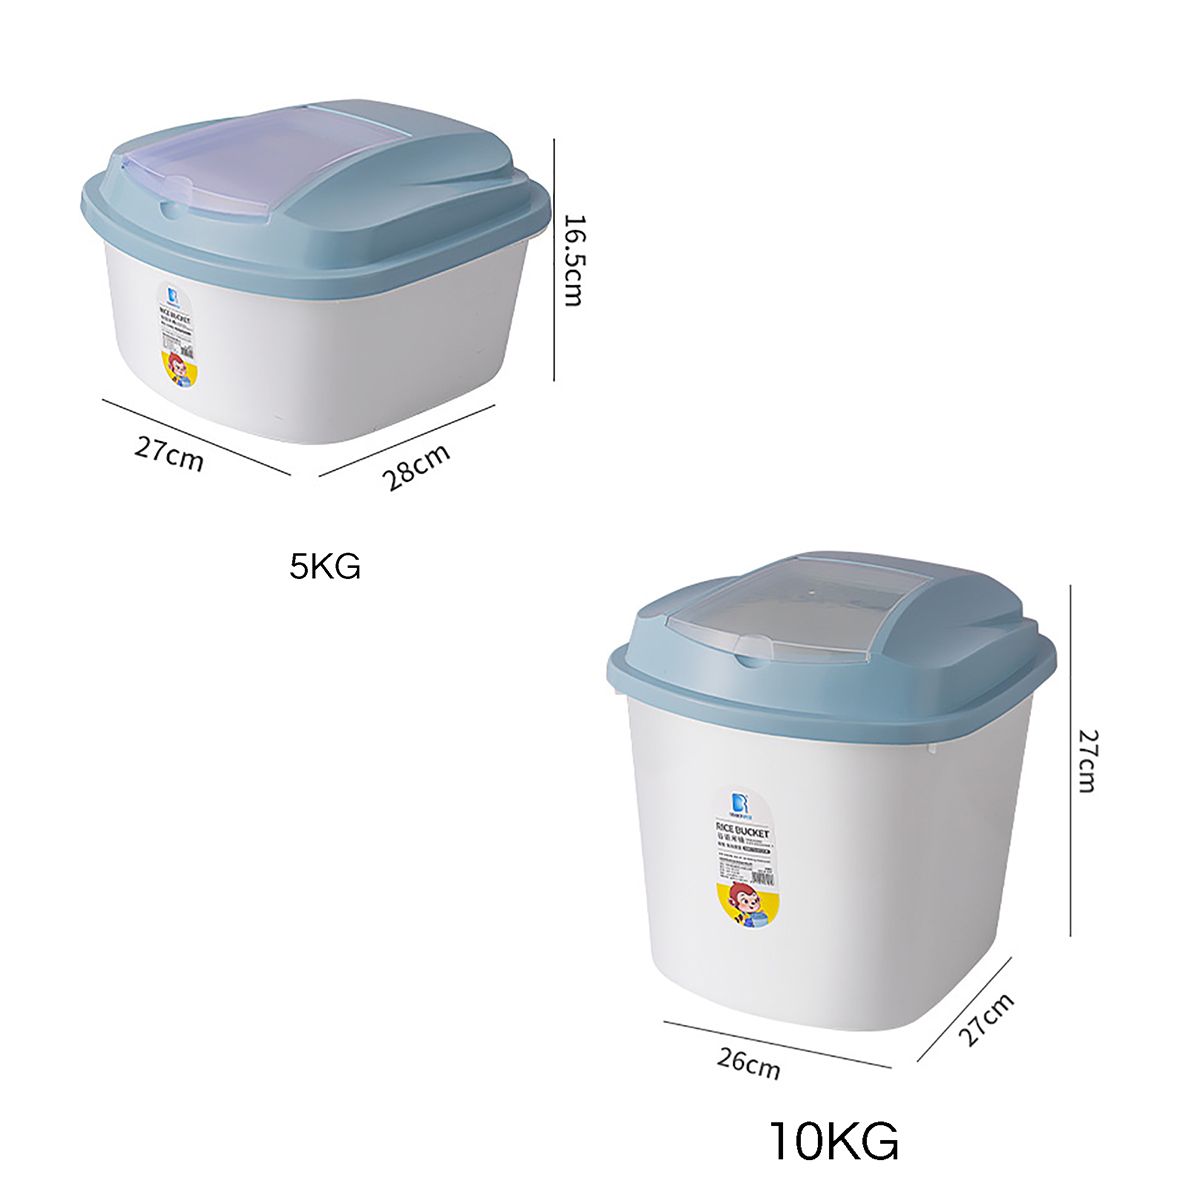 Airtight-Pet-Food-Storage-Container-Rice-Bucket-Storage-Container-Box-for-Storing-Rice-Flour-Dry-Foo-1857848-4